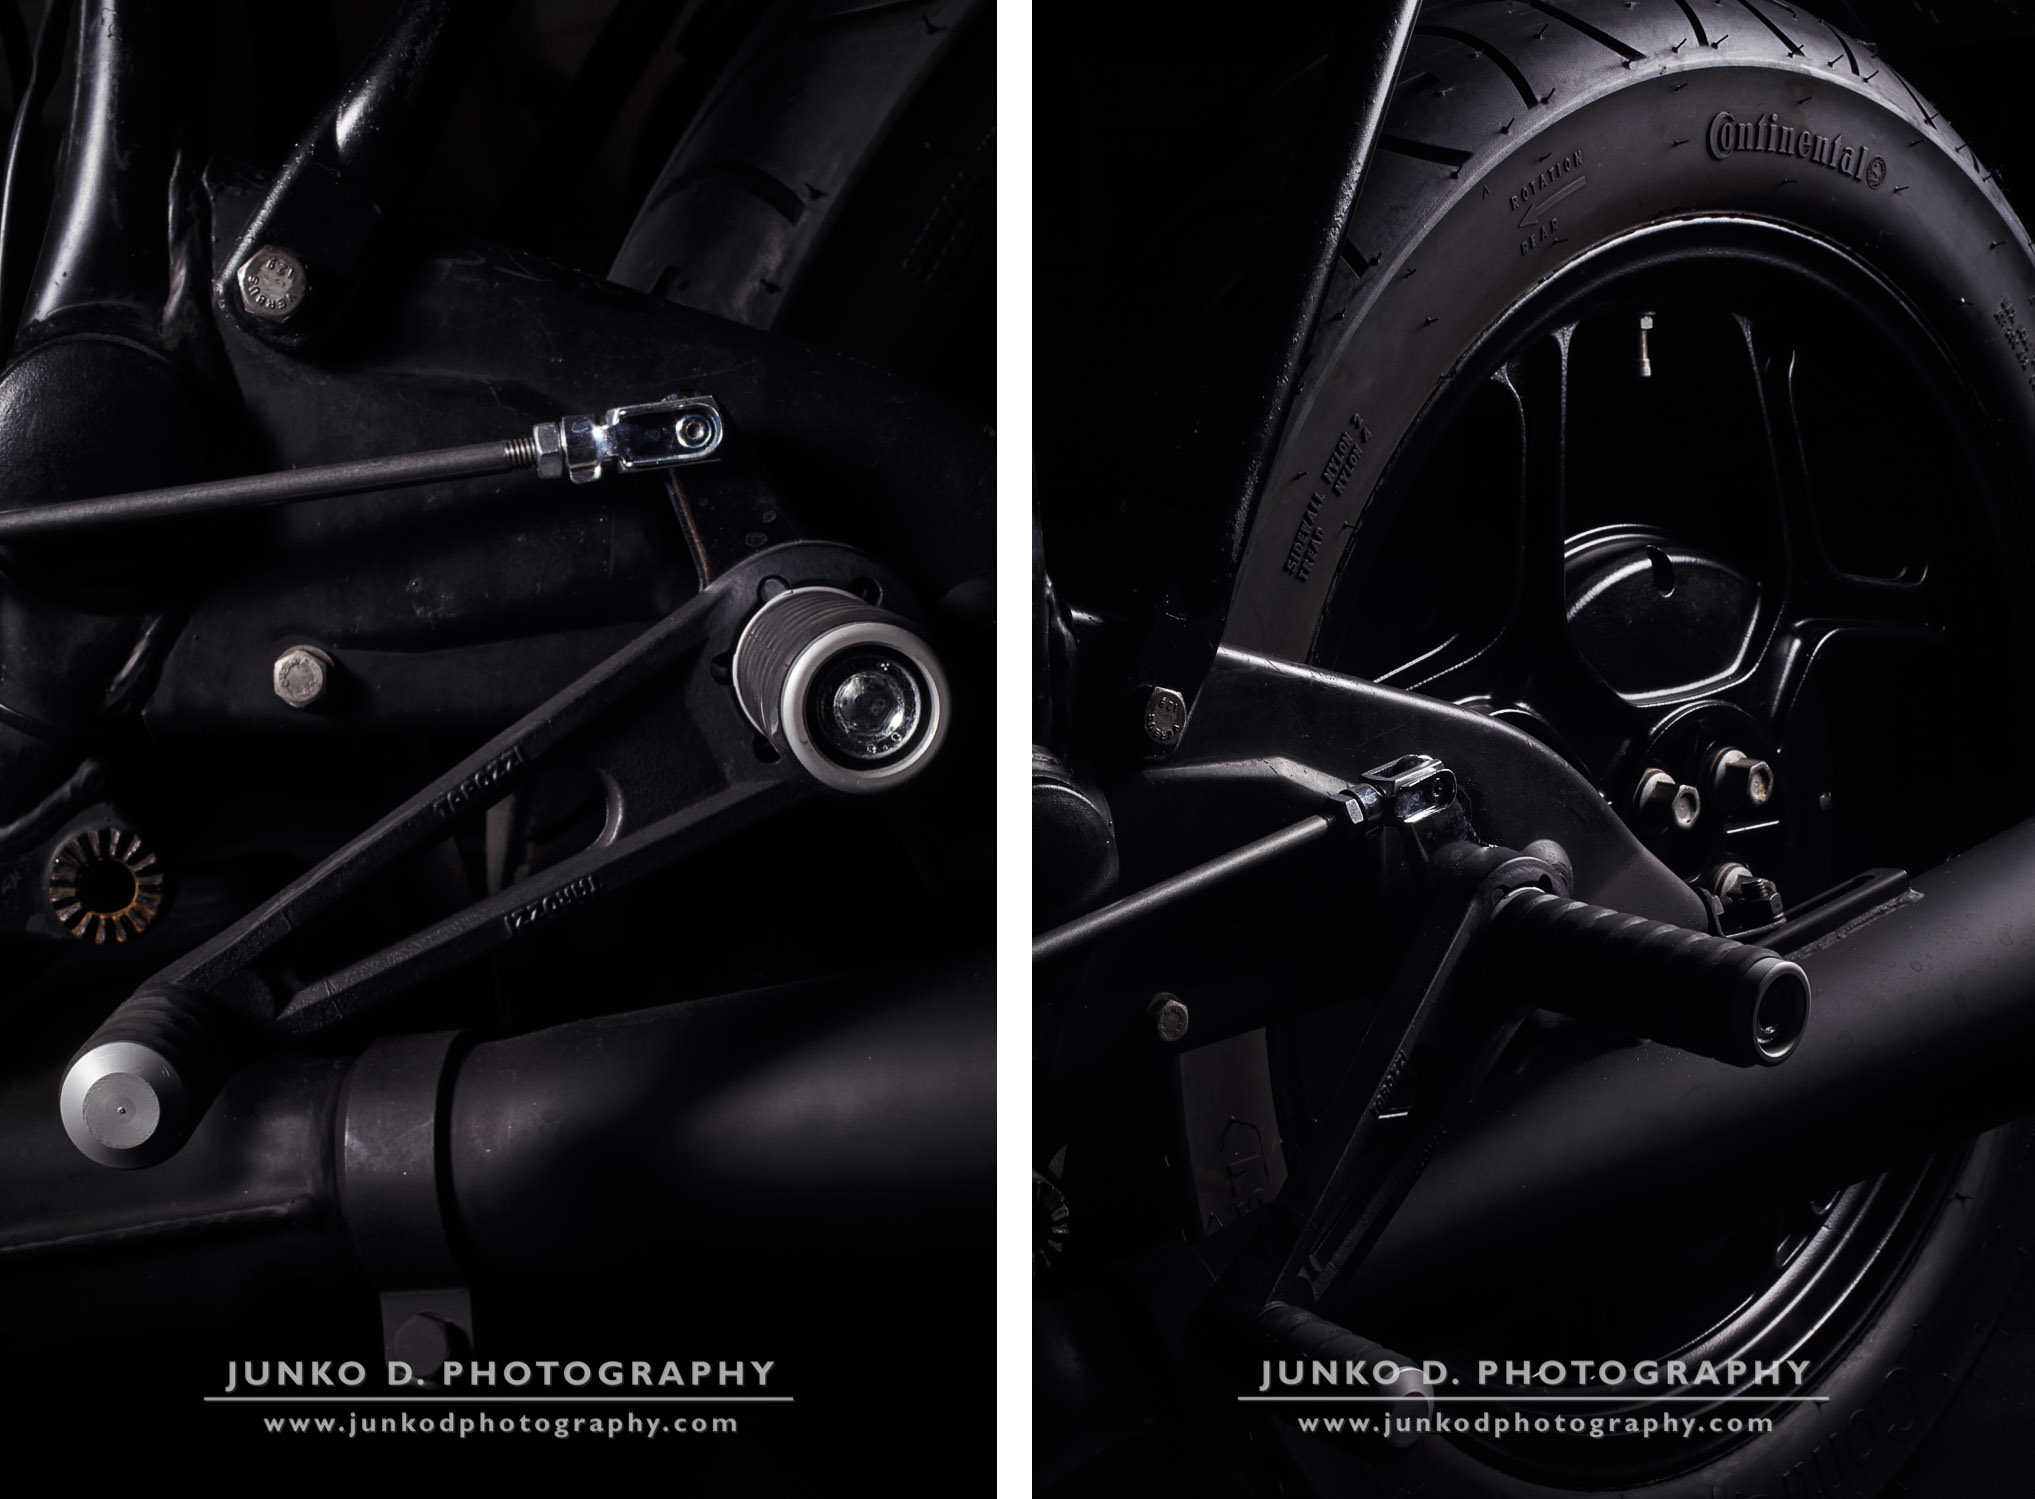 motorcycle by Junko d. Photography